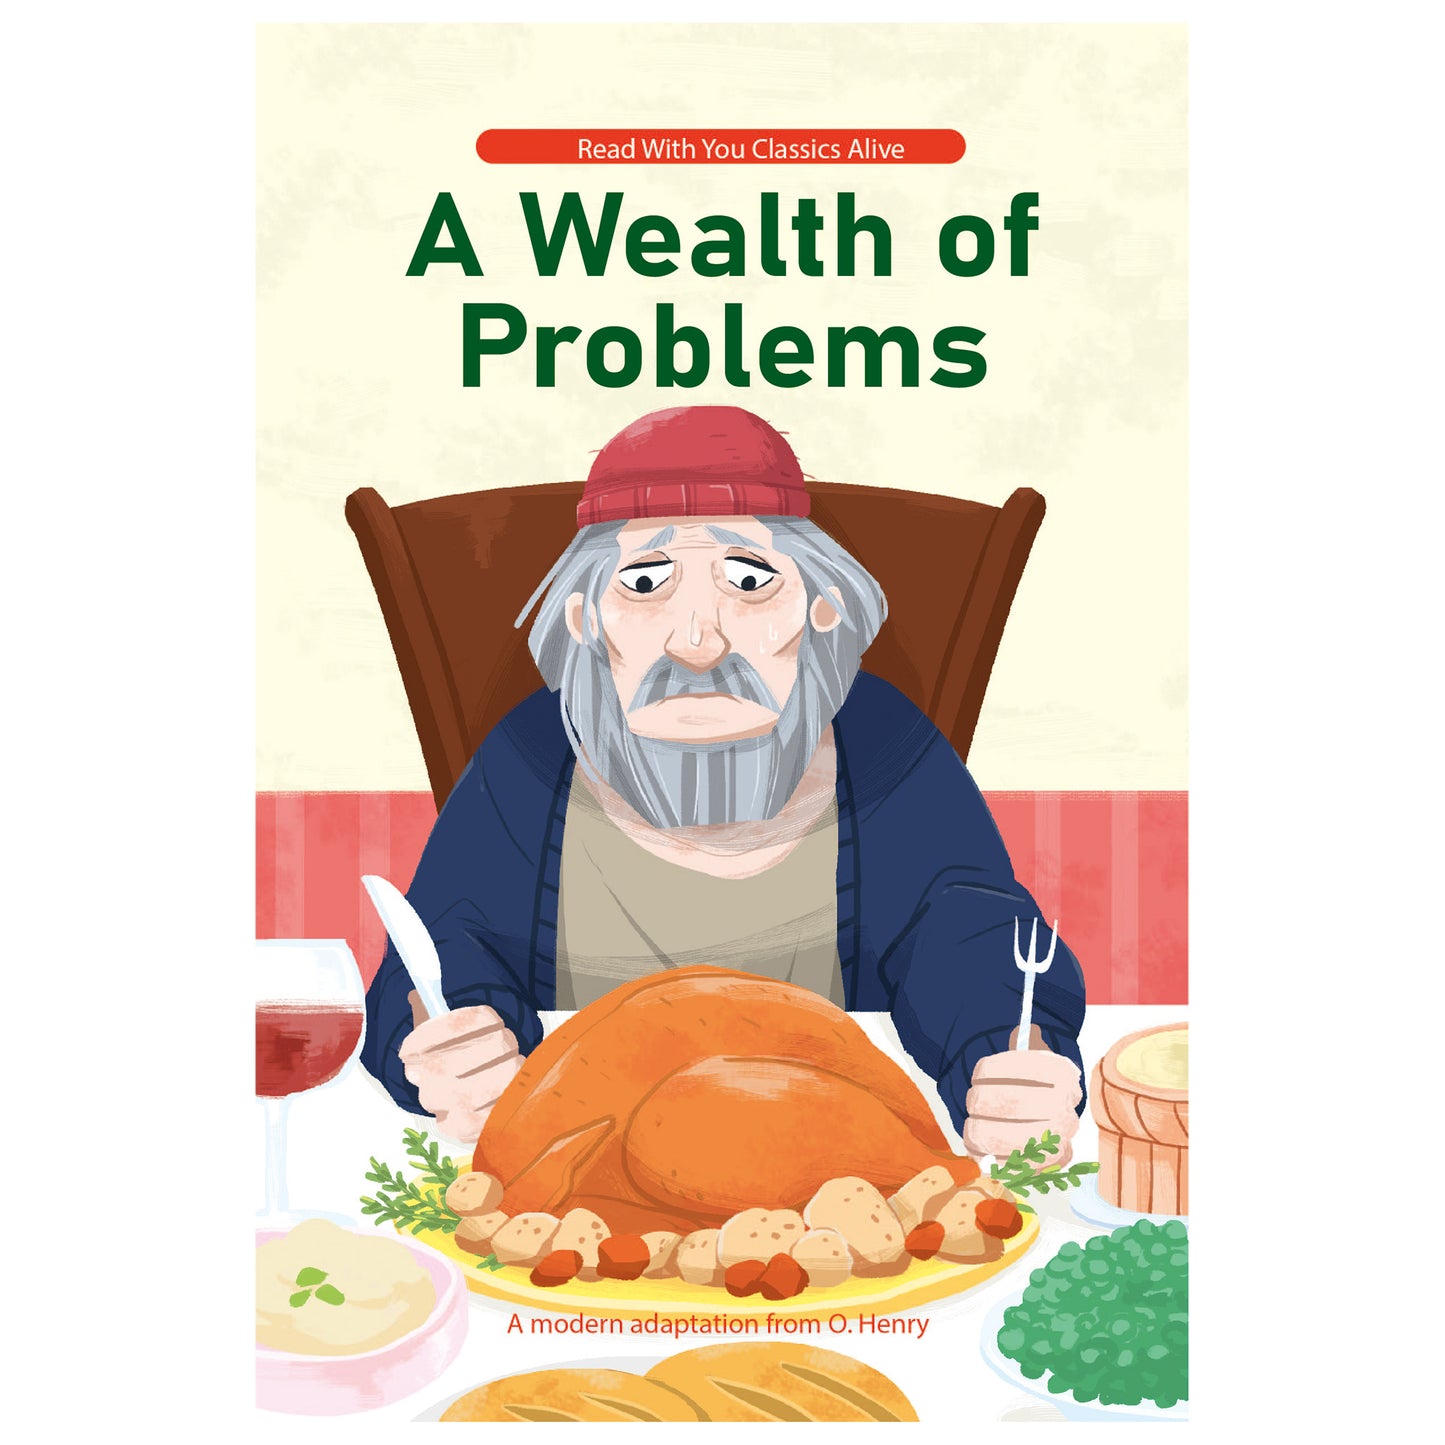 A Wealth of Problems